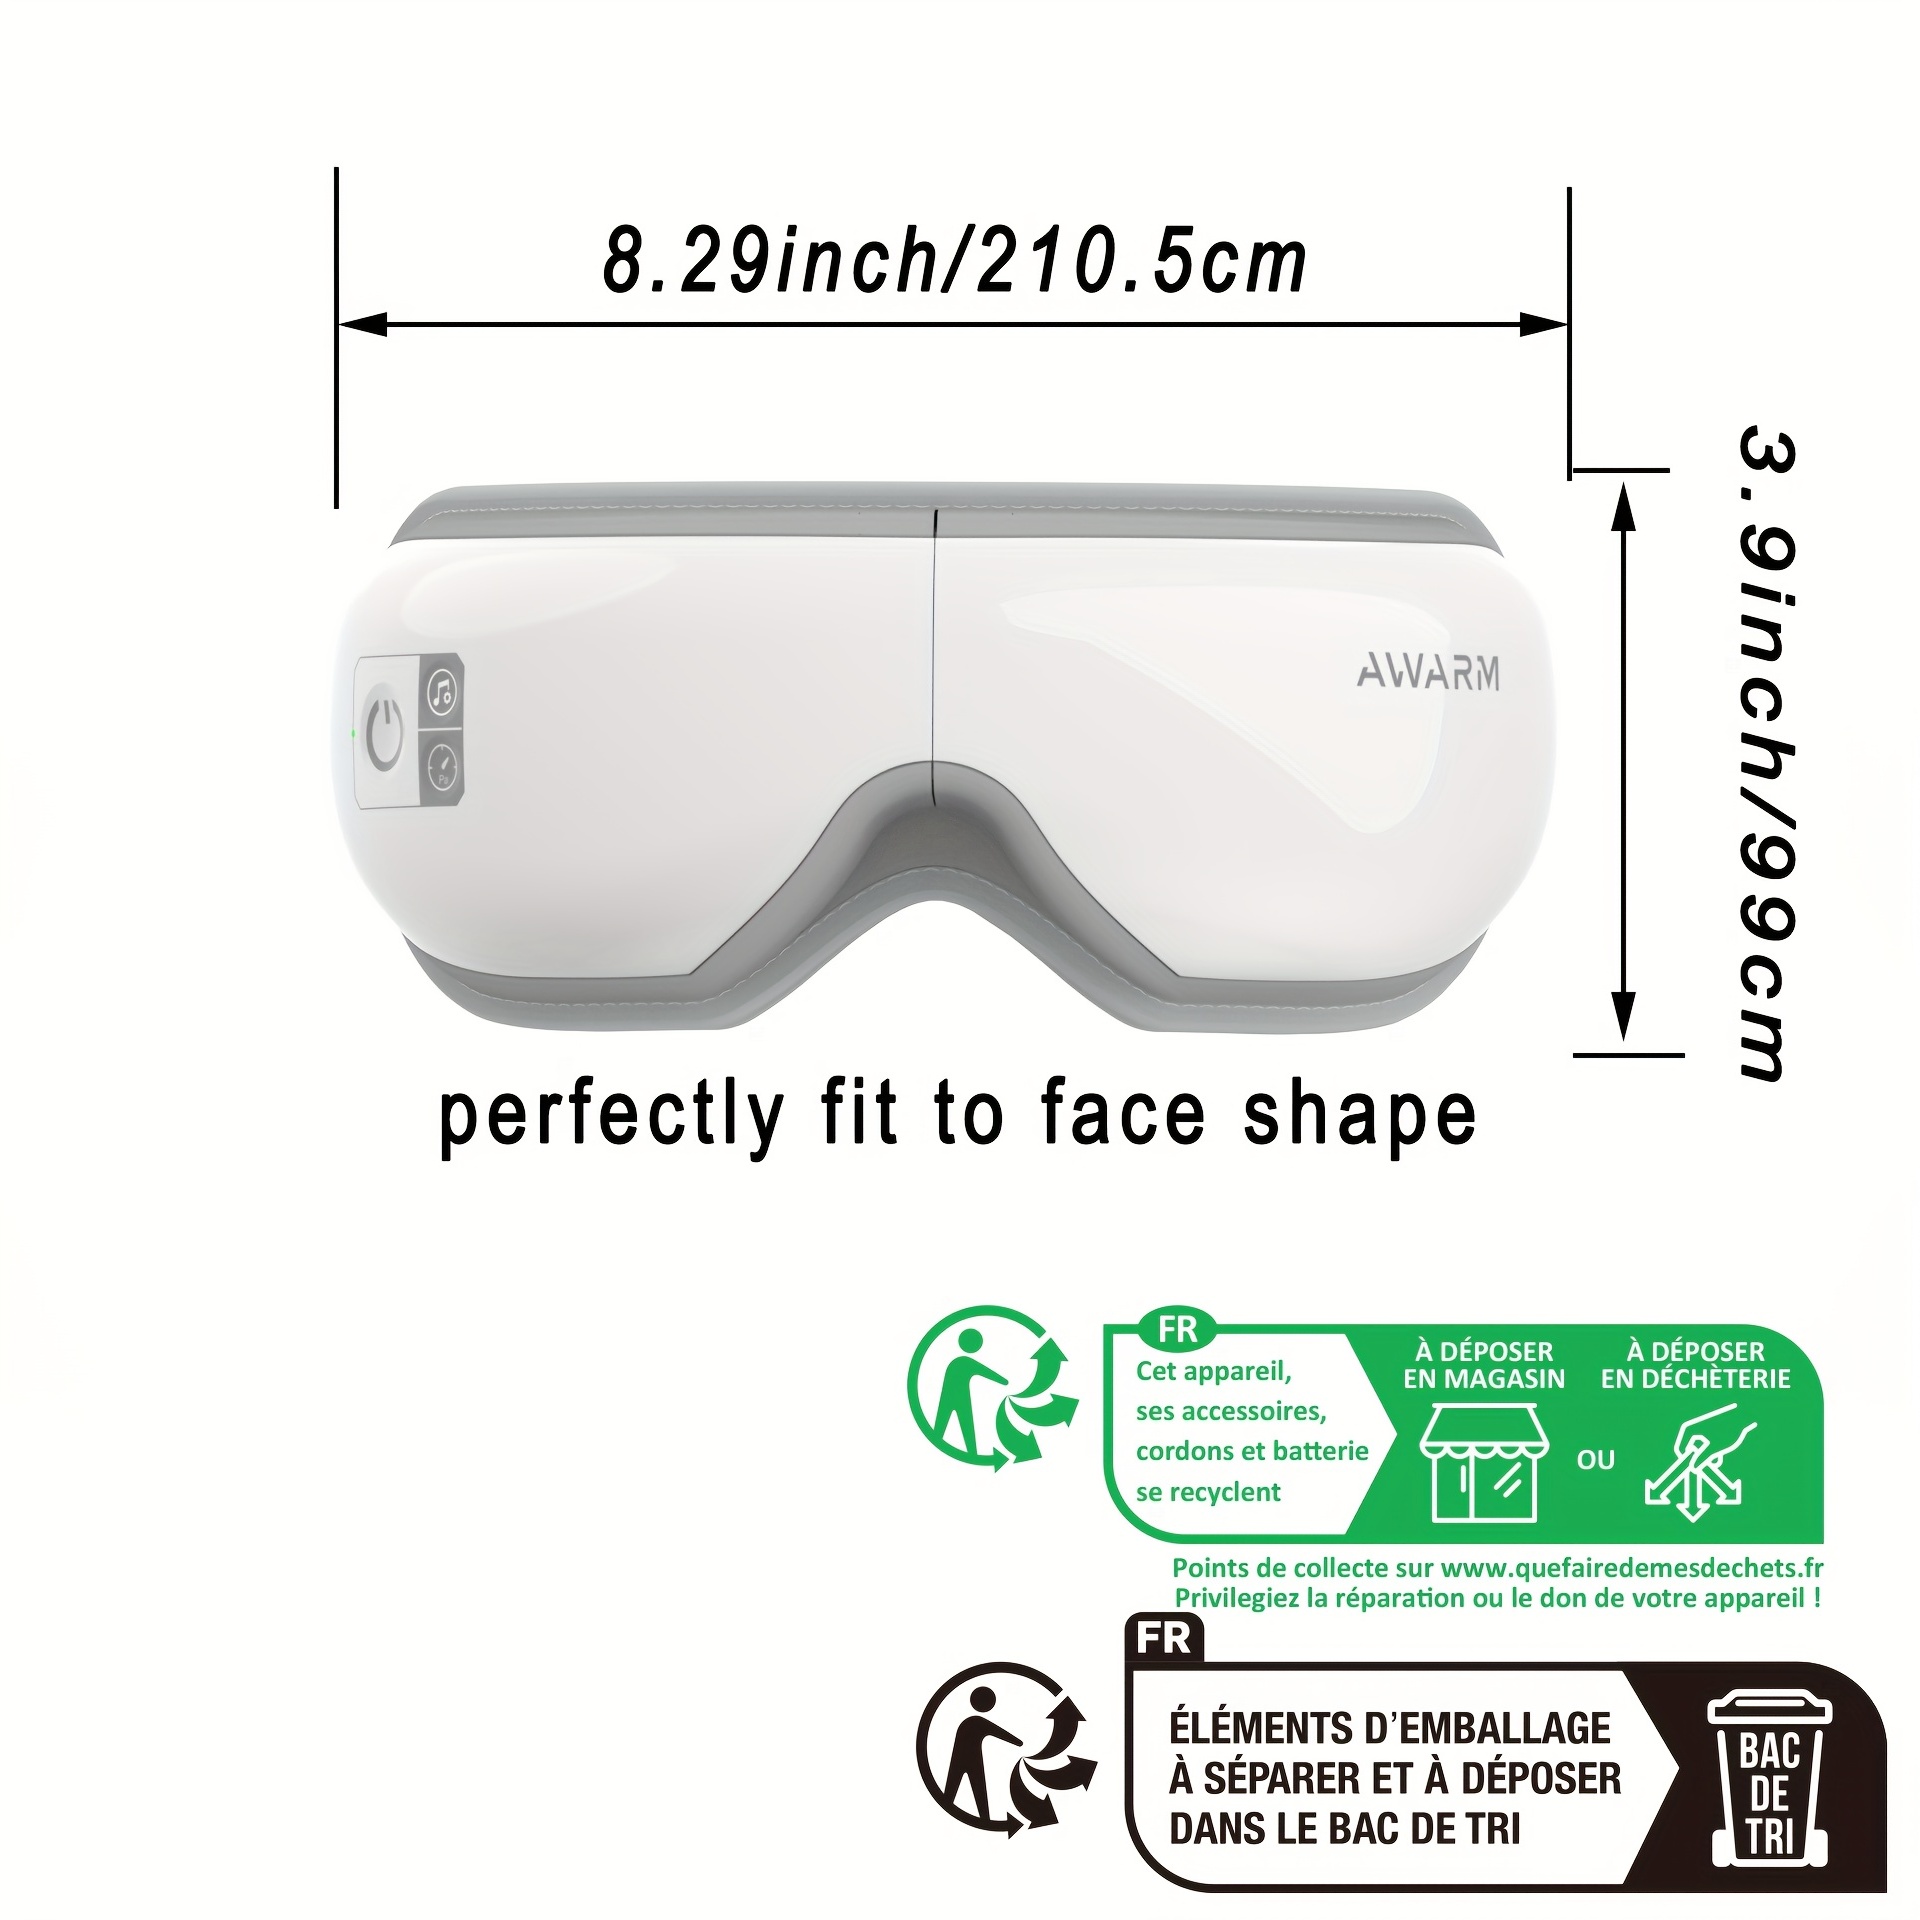 RENPHO Rechargeable Foldable Eye Massager for The Eye